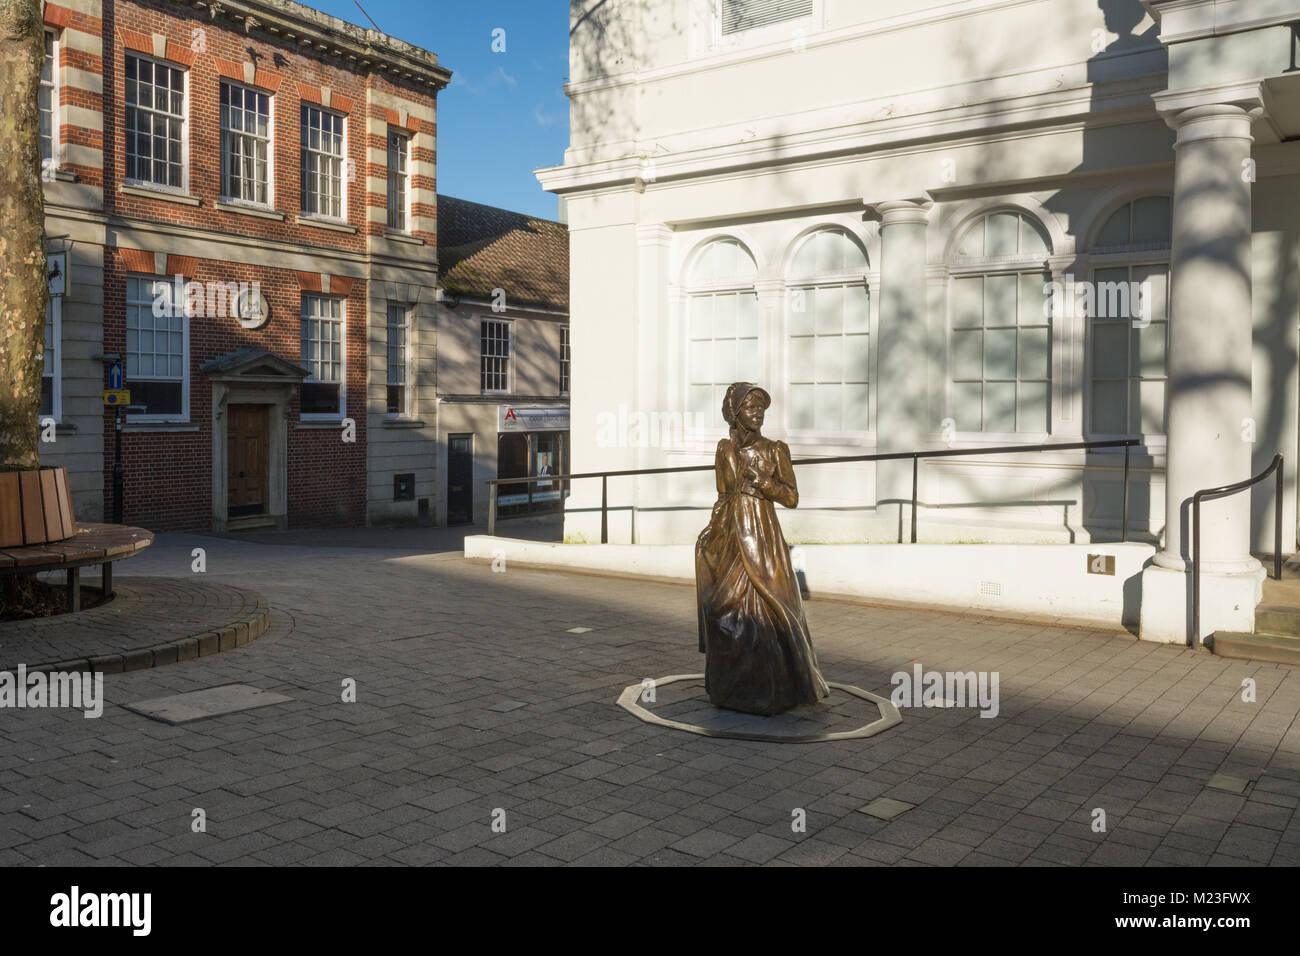 The old town hall, now housing the Willis museum, in Basingstoke town centre, Hampshire, UK, with Jane Austen bronze sculpture Stock Photo